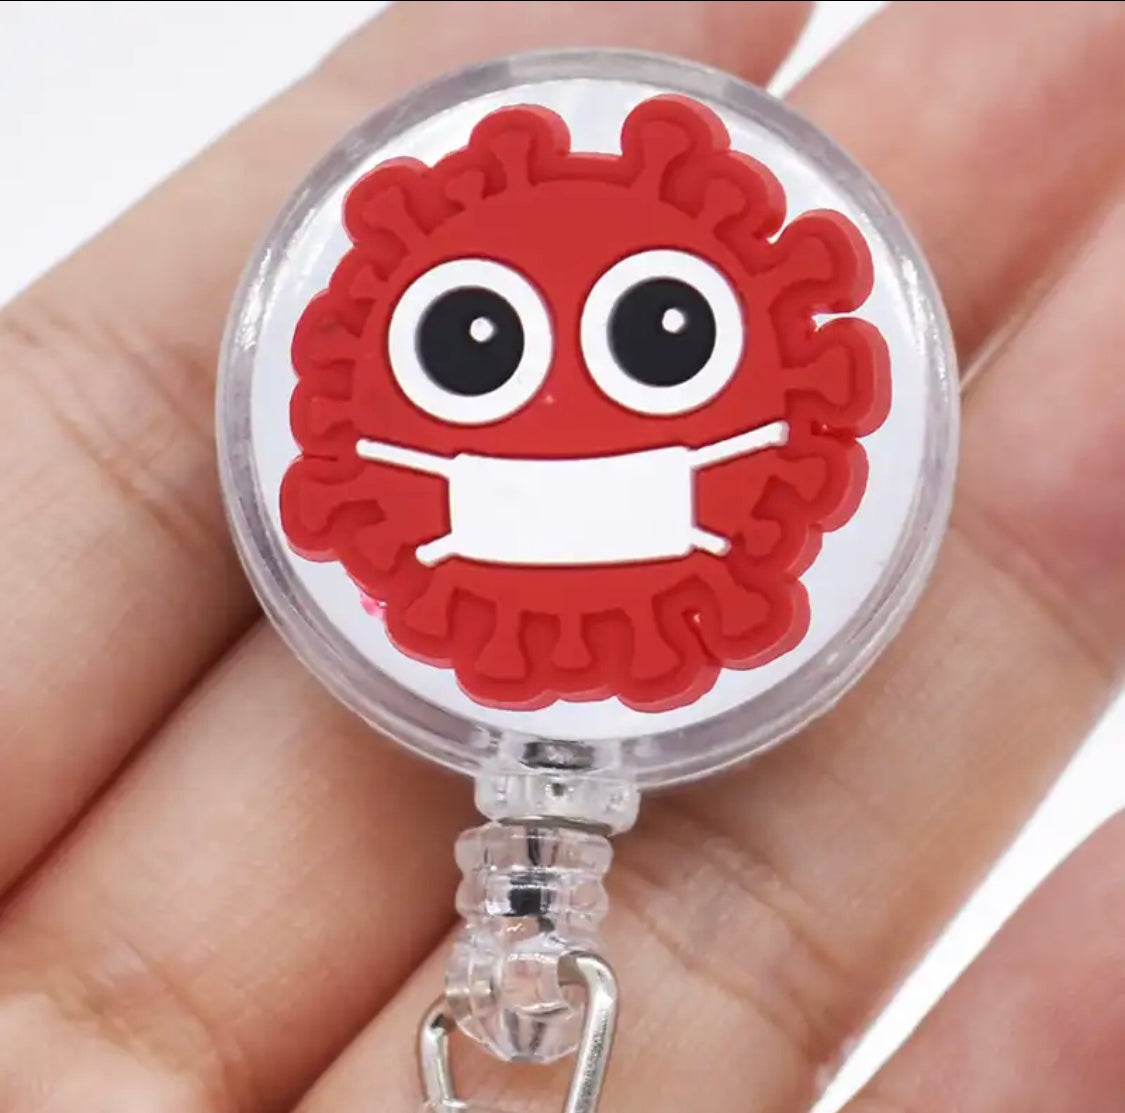 Wholesale Retractable Badge Reel Cute Cartoon Design For Nurses, Students,  And Exhibitions ID, Name, Leather Id Badge Holder Perfect Office Supply  QW7384 From Easy_deal, $0.88